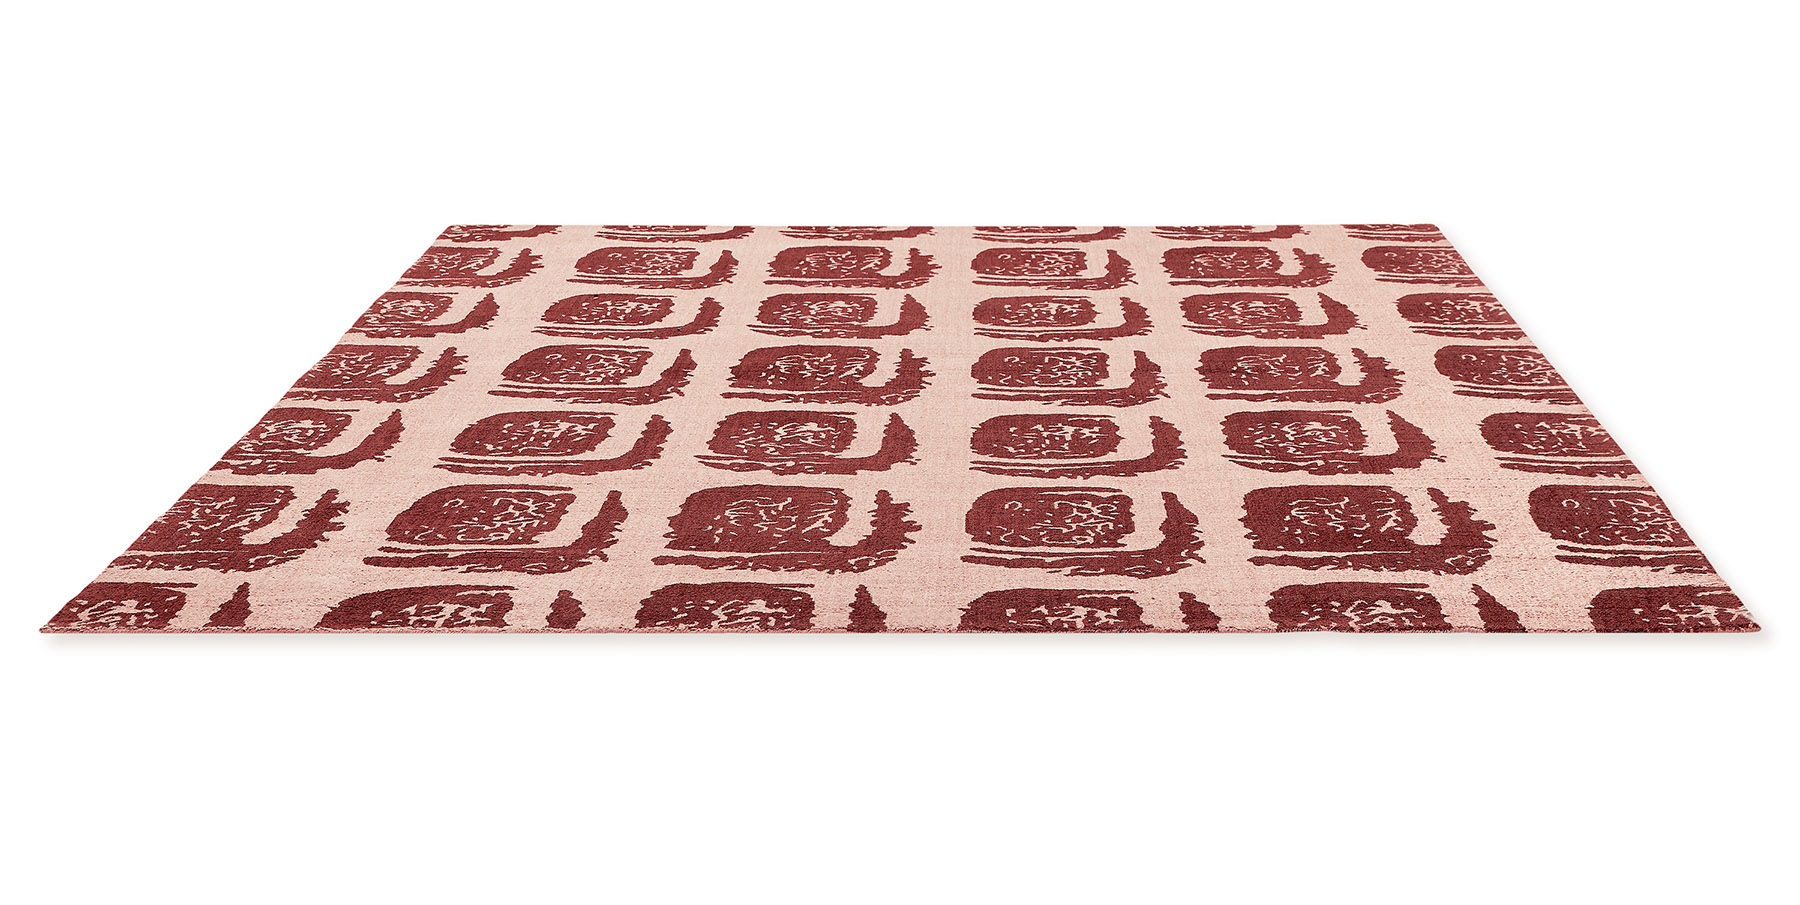 Woodblock Red Rug ☞ Size: 200 x 280 cm